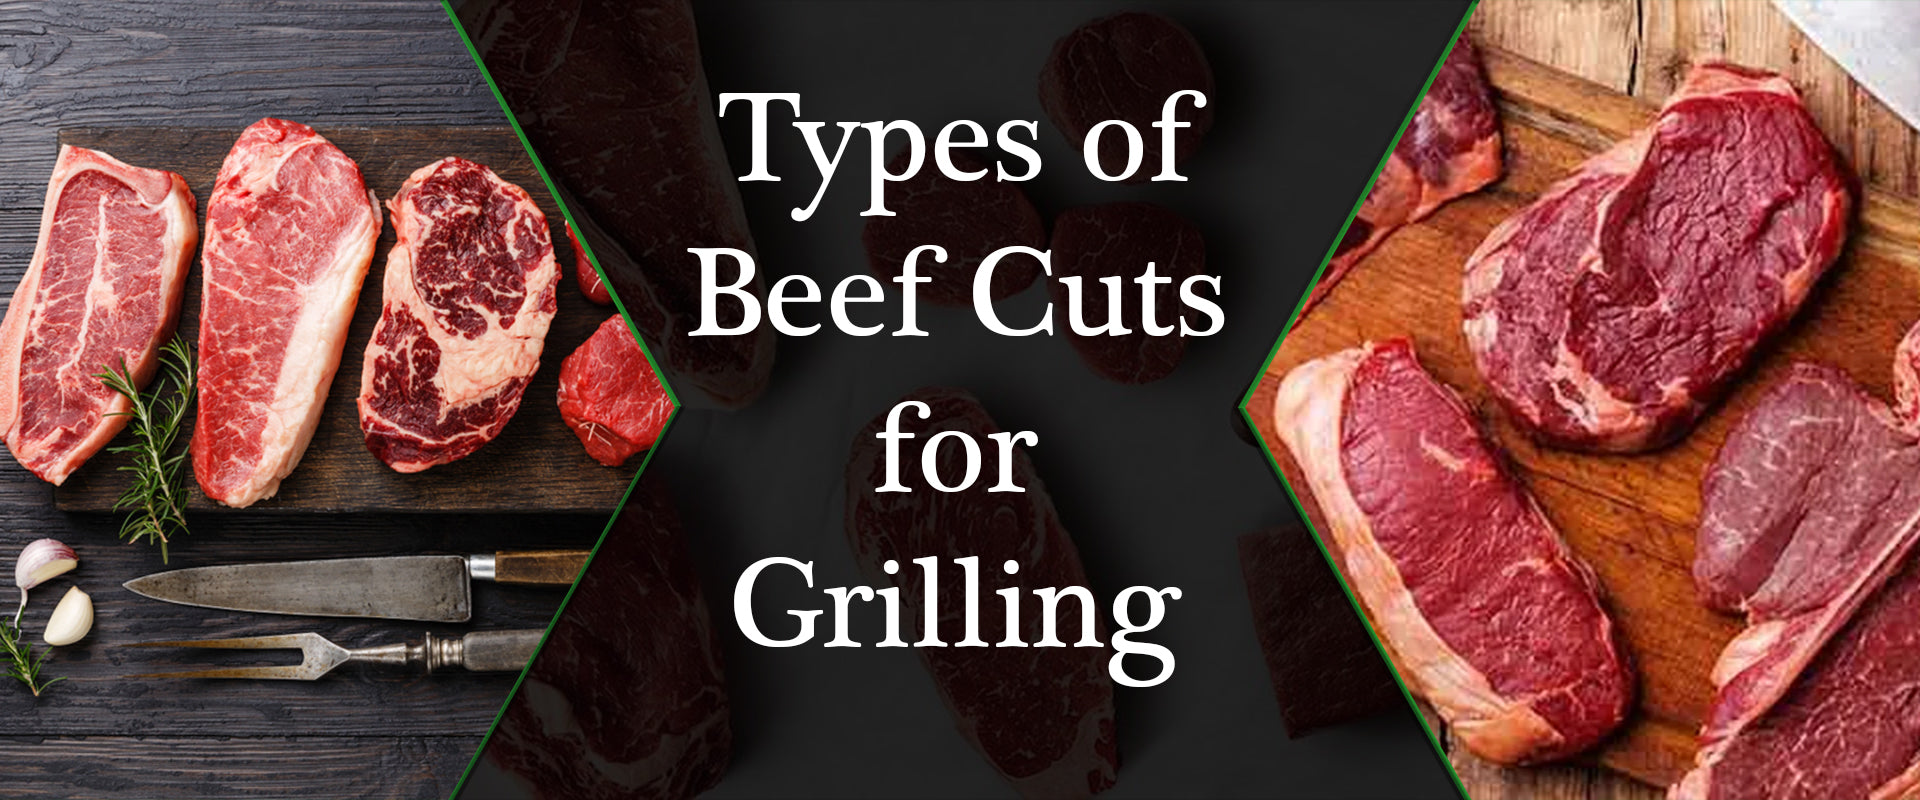 Types of Beef Cuts for Grilling 